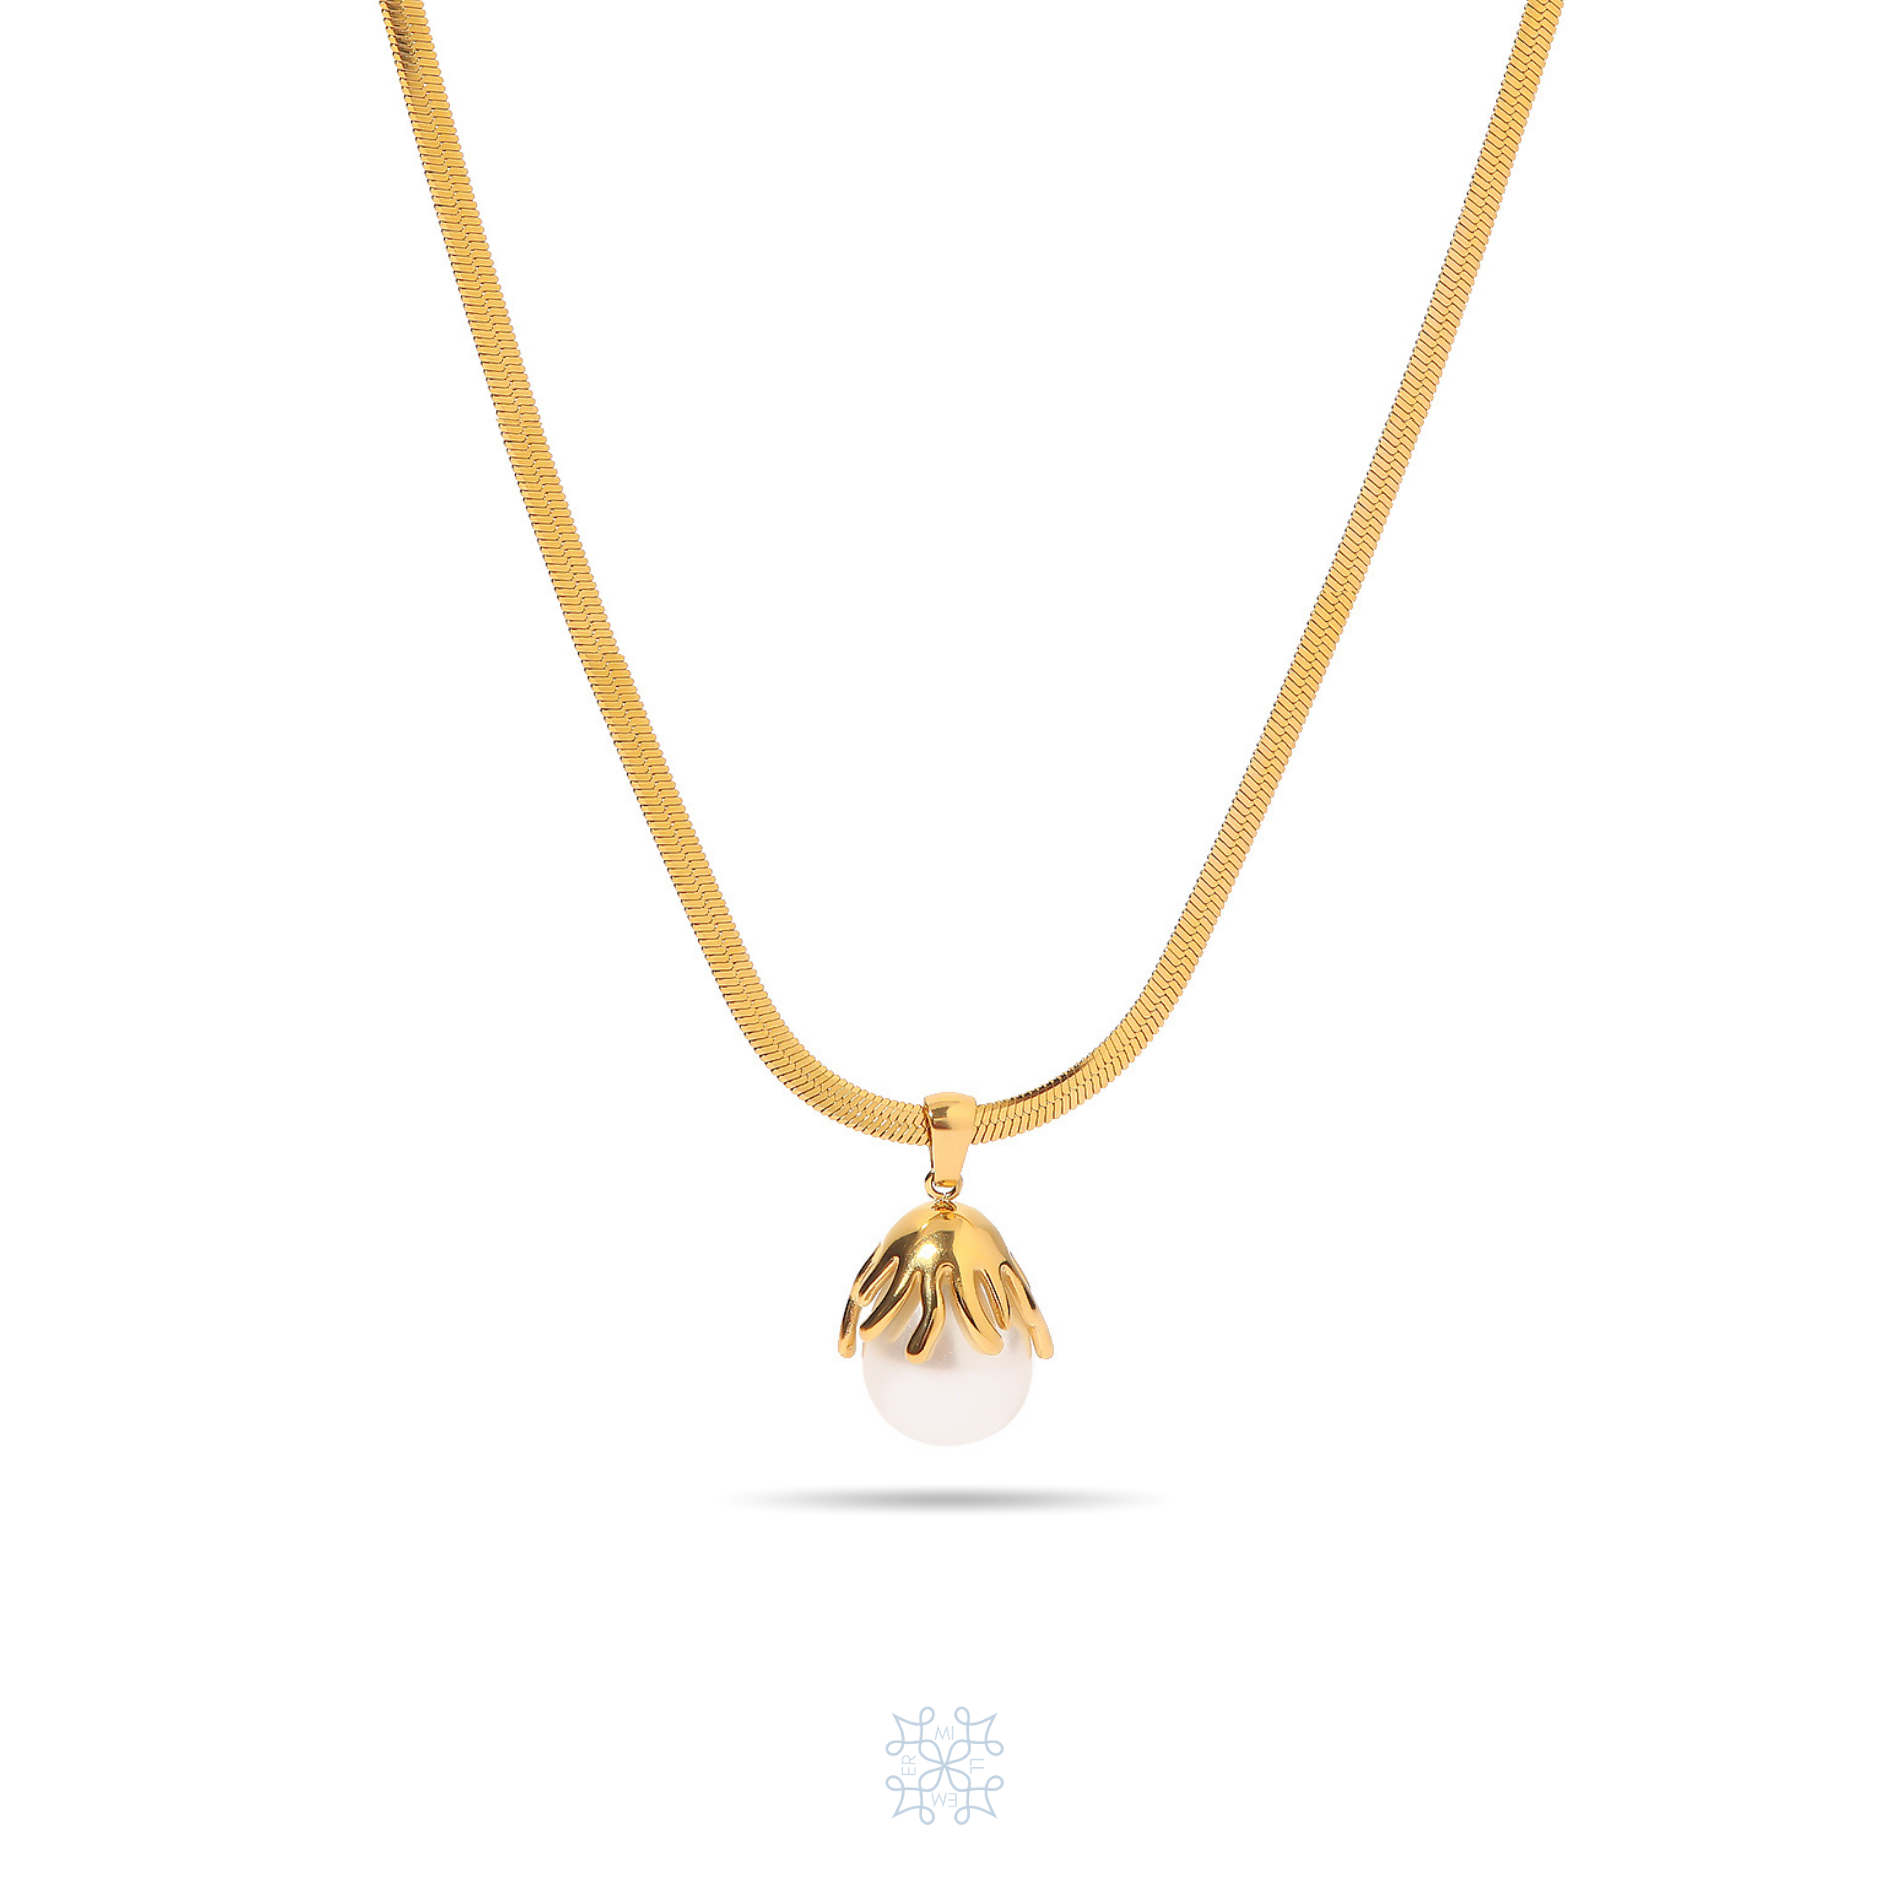 CORAL Pearl Pendant Gold Necklace - Herringbone gold chain with pearl pendant. The pearl is attched in the inside of a gold coral or flower shape metal pendant.